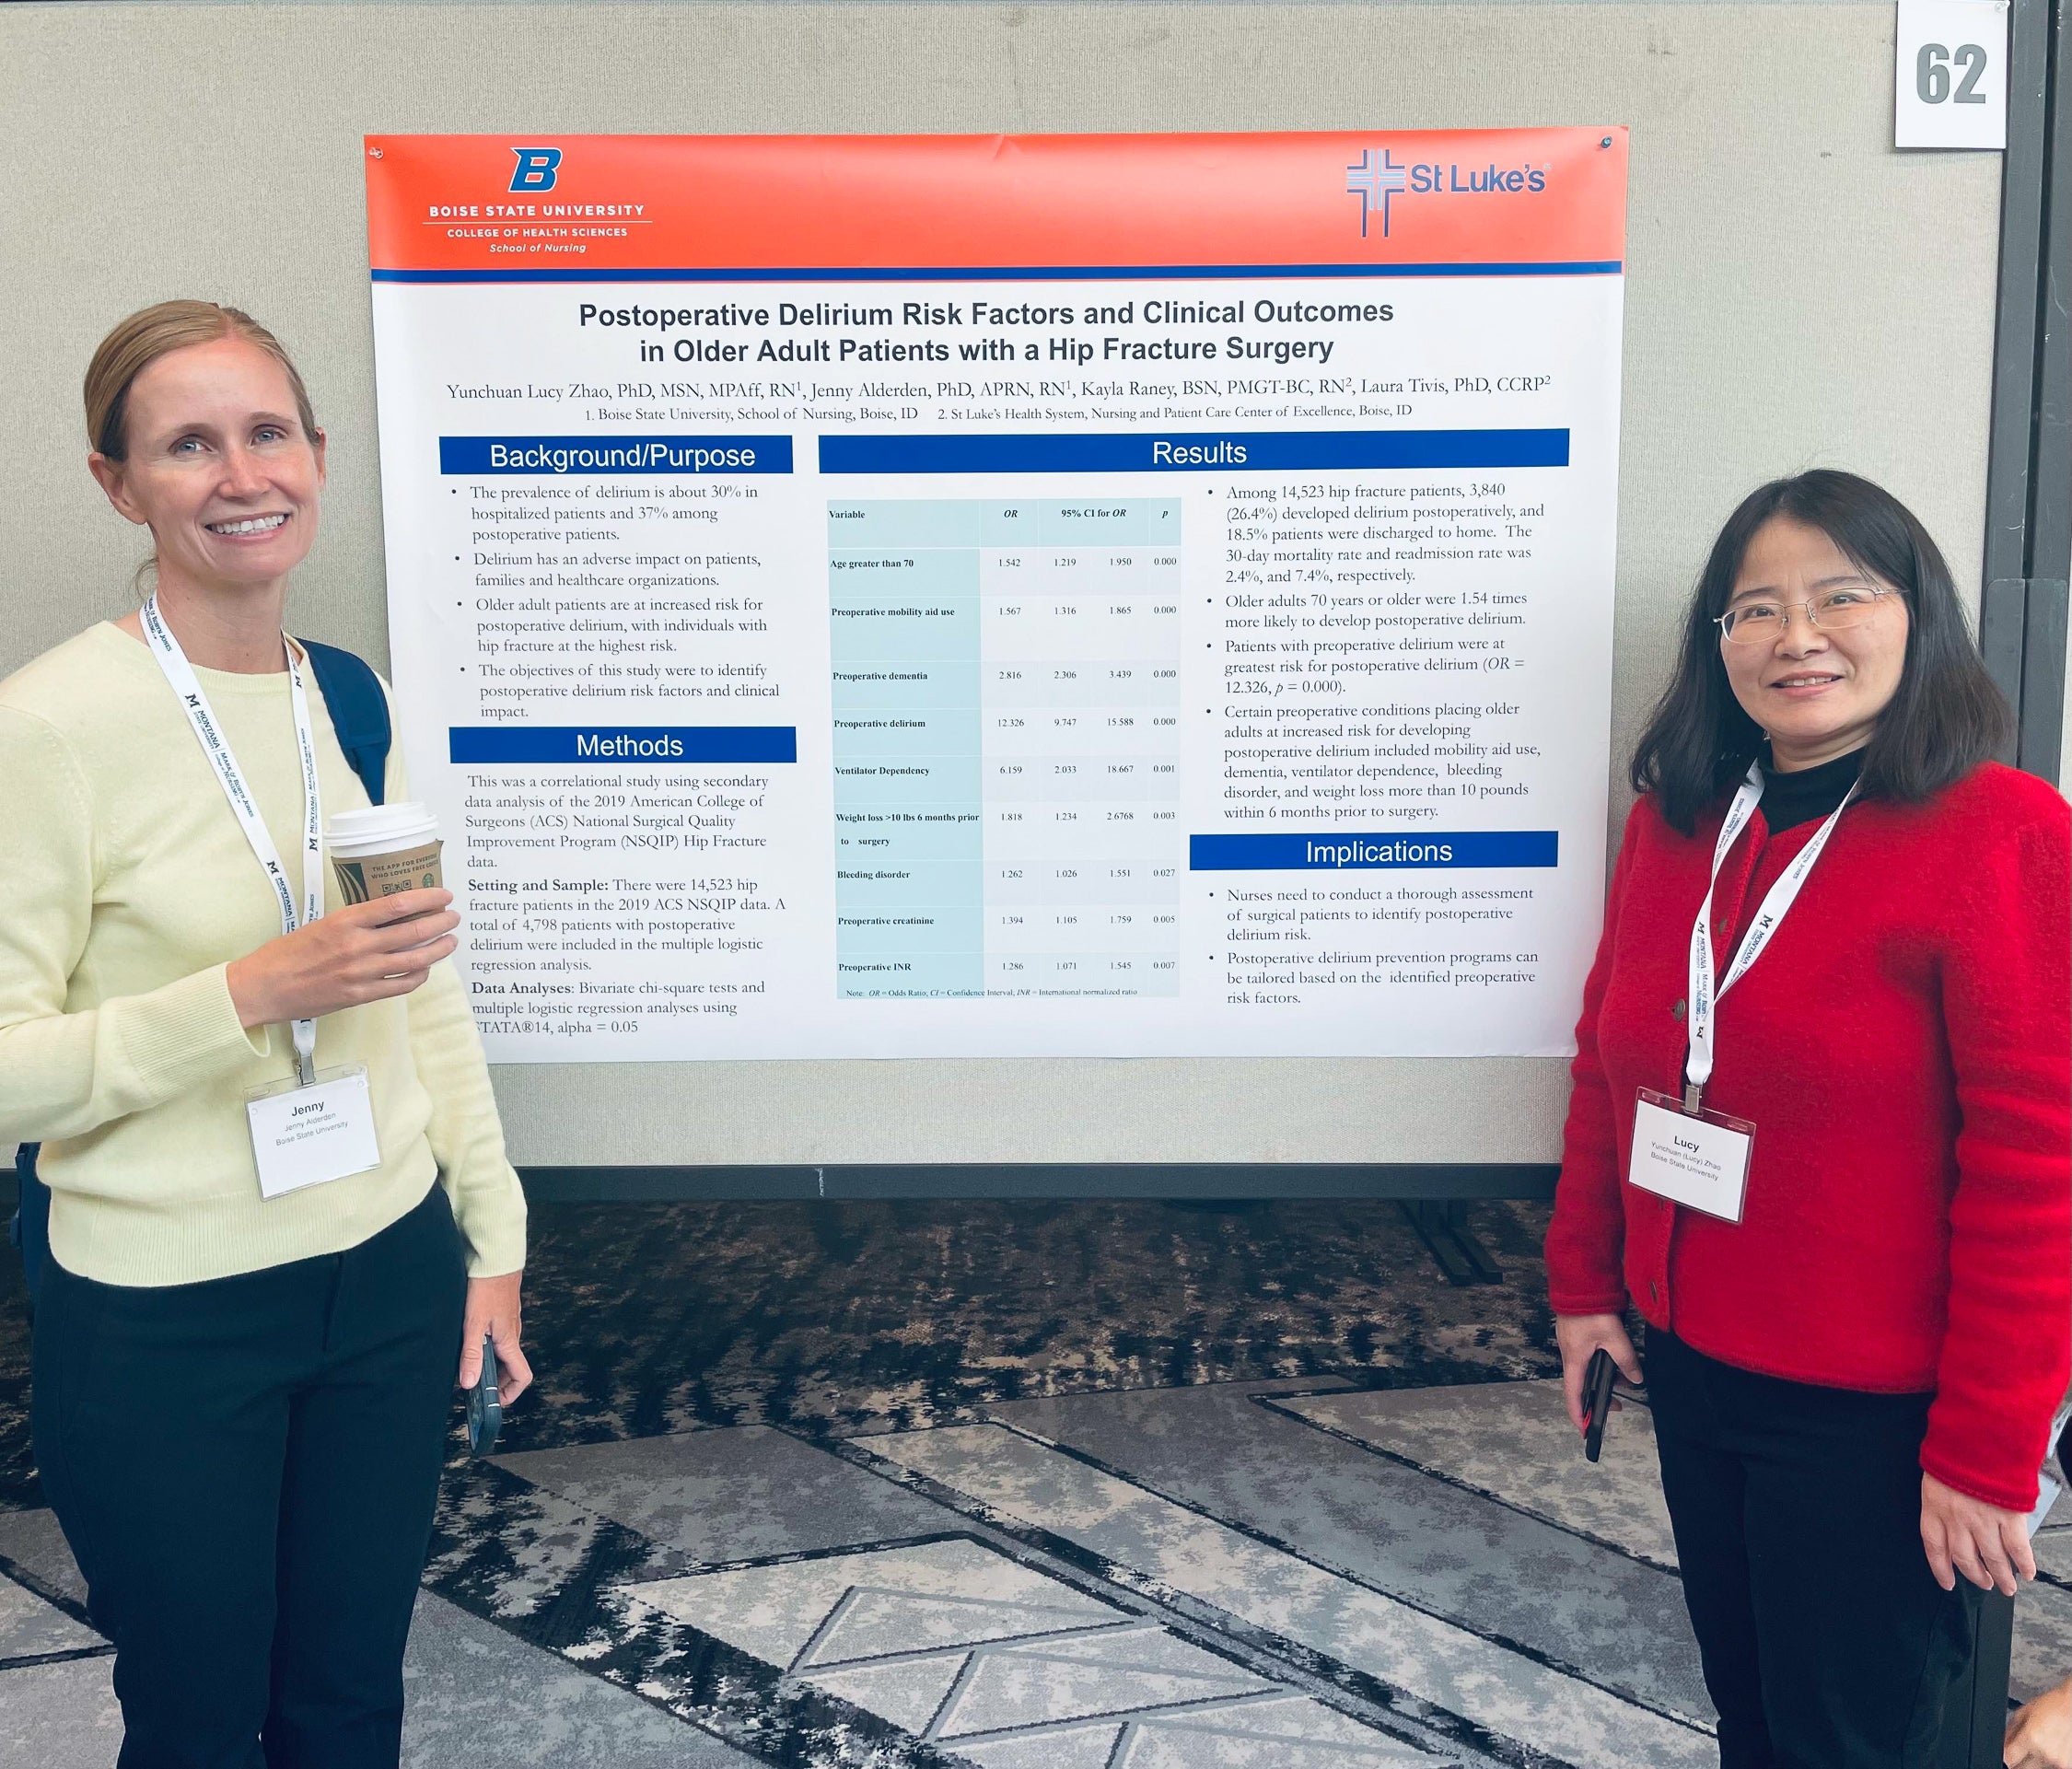 Associate professors Jenny Alderden and Lucy Zhao with their research poster about postoperative delirium risk factors.